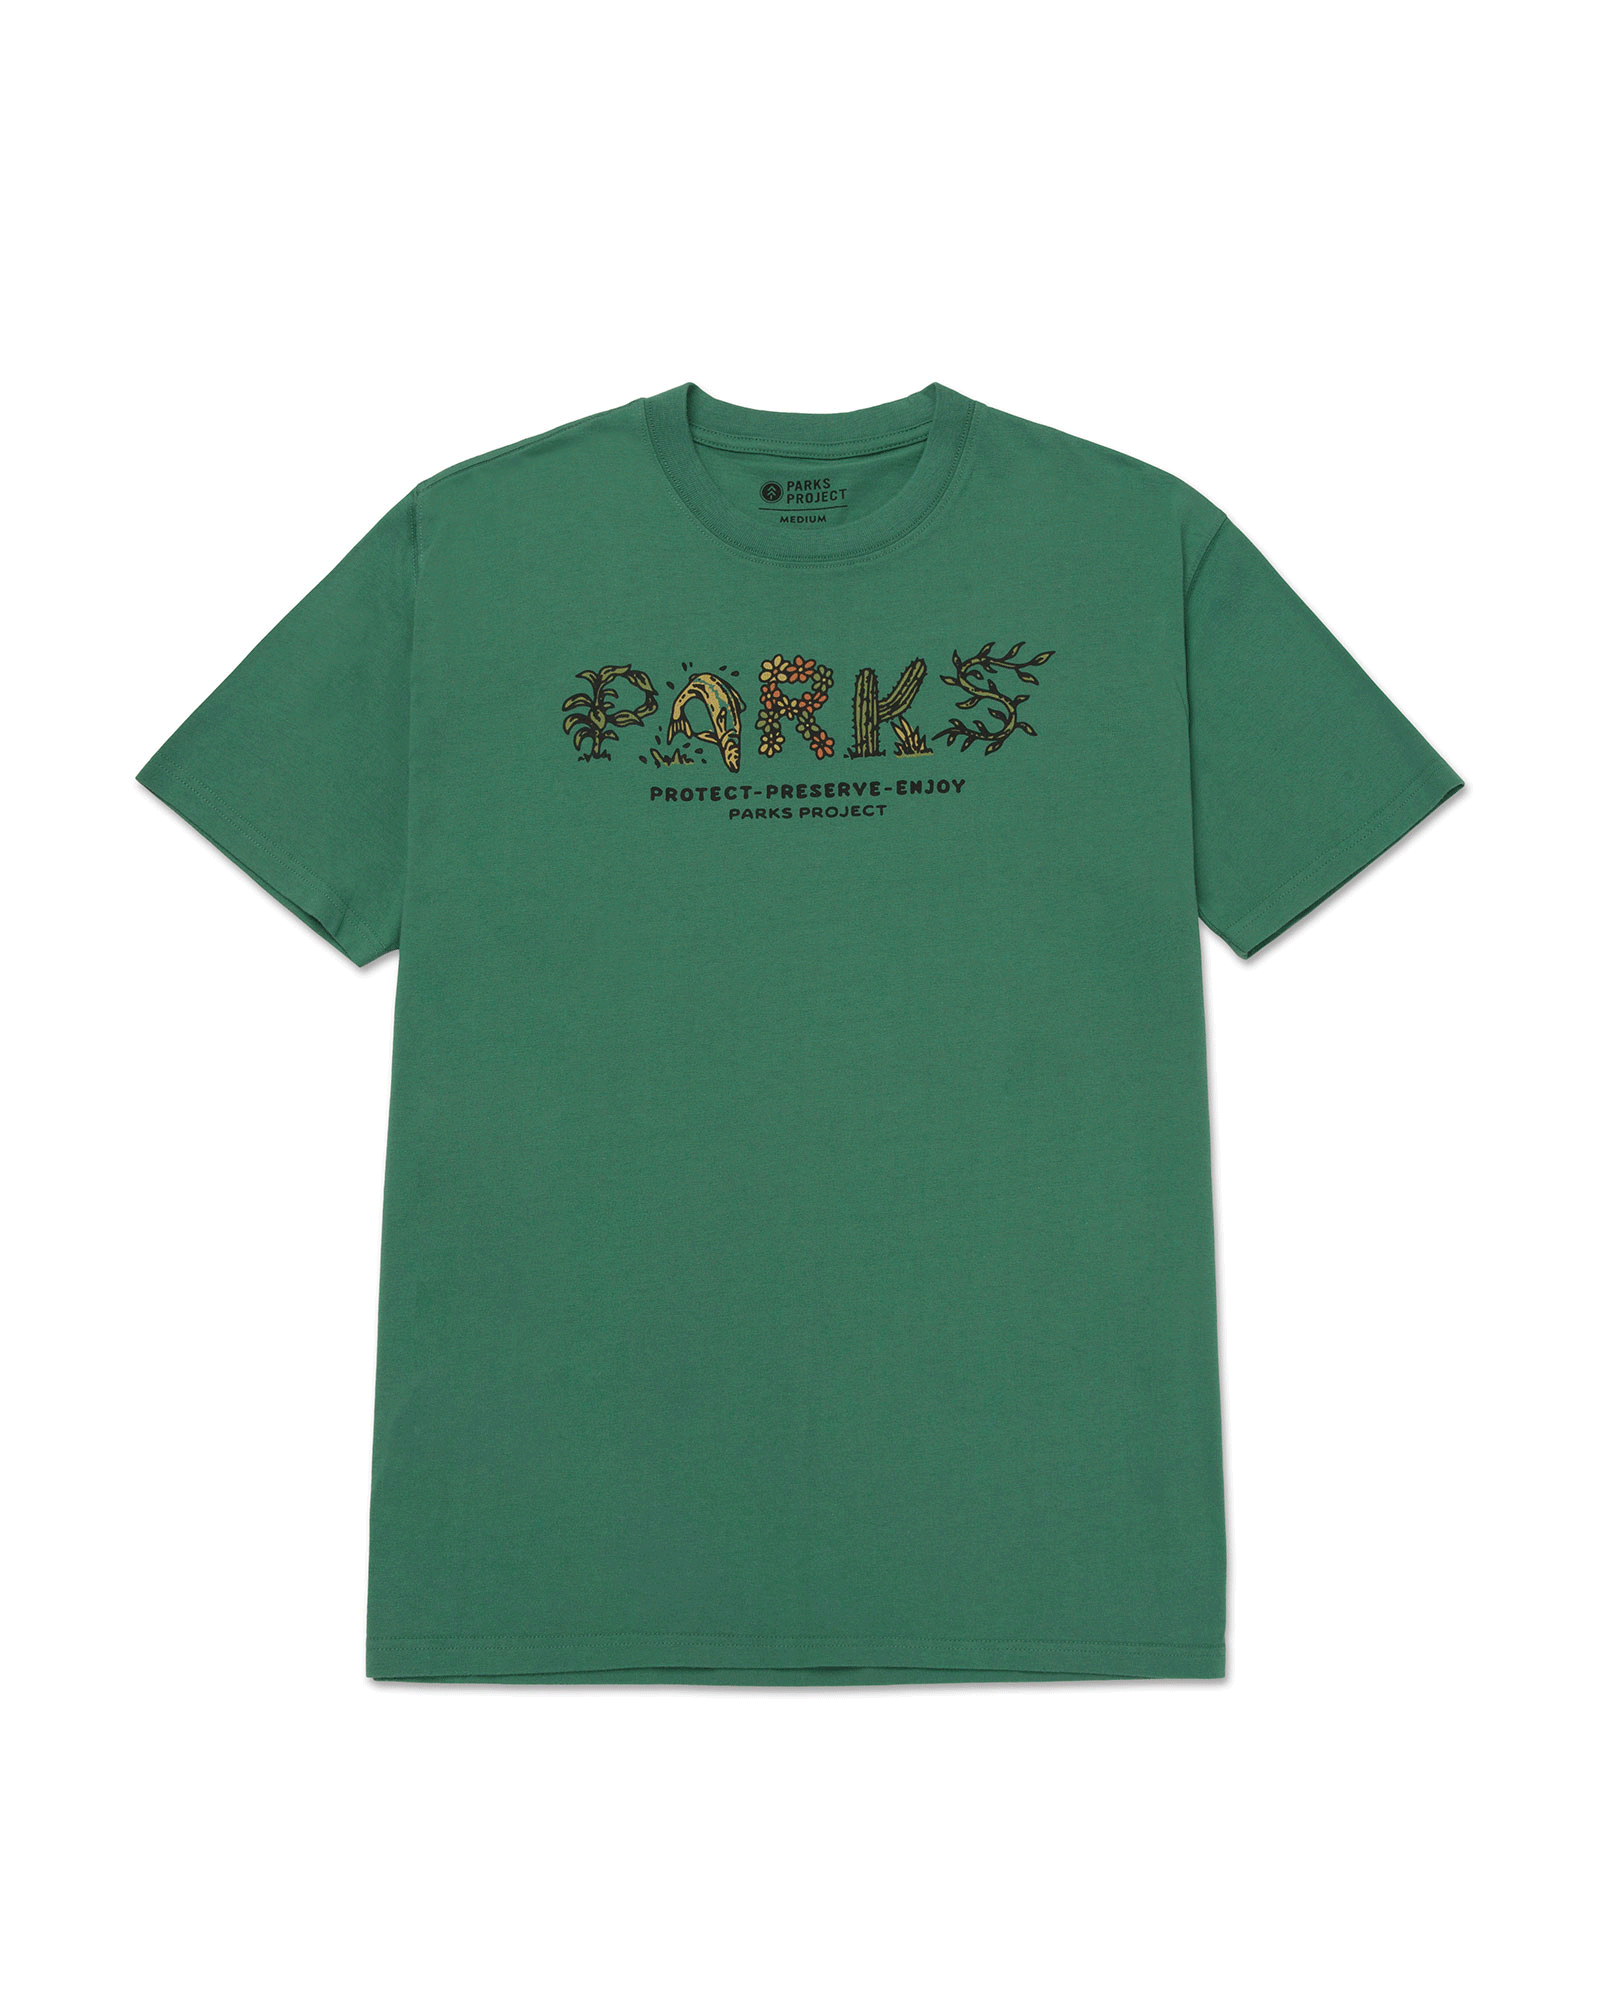 Parks Project Adventure with Friends Tee | Natural | L Sports Basement